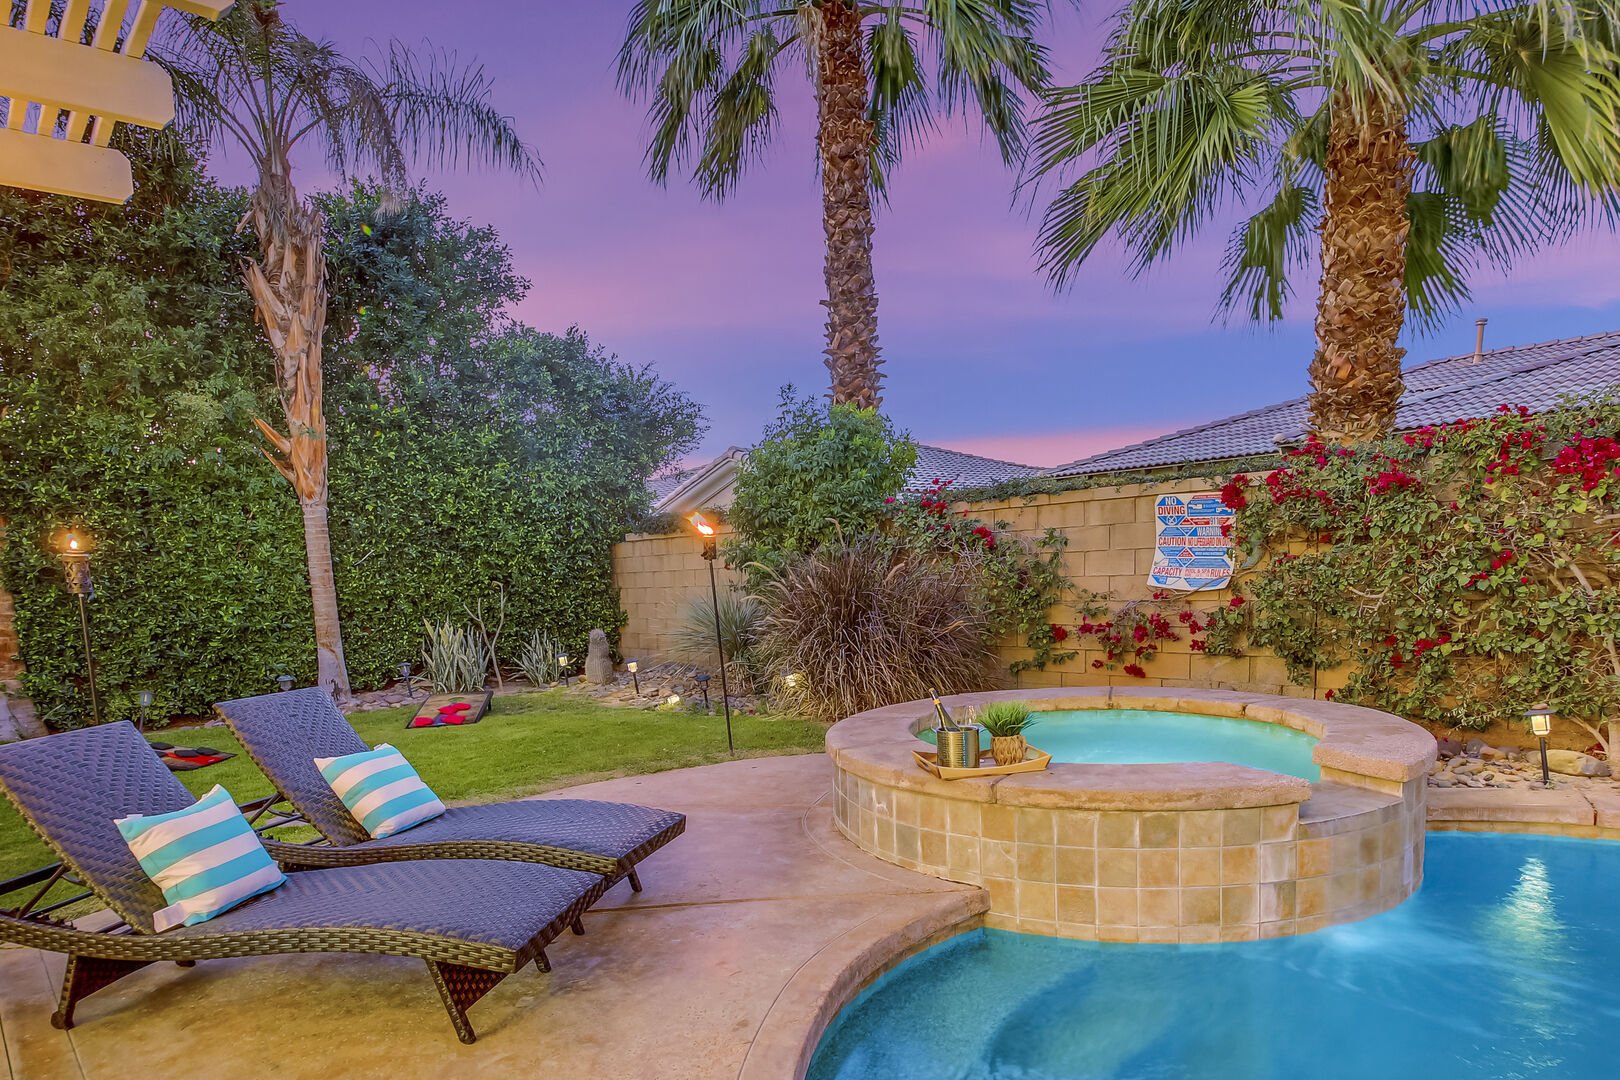 You will find that Terra Azul has a backyard made for entertaining.